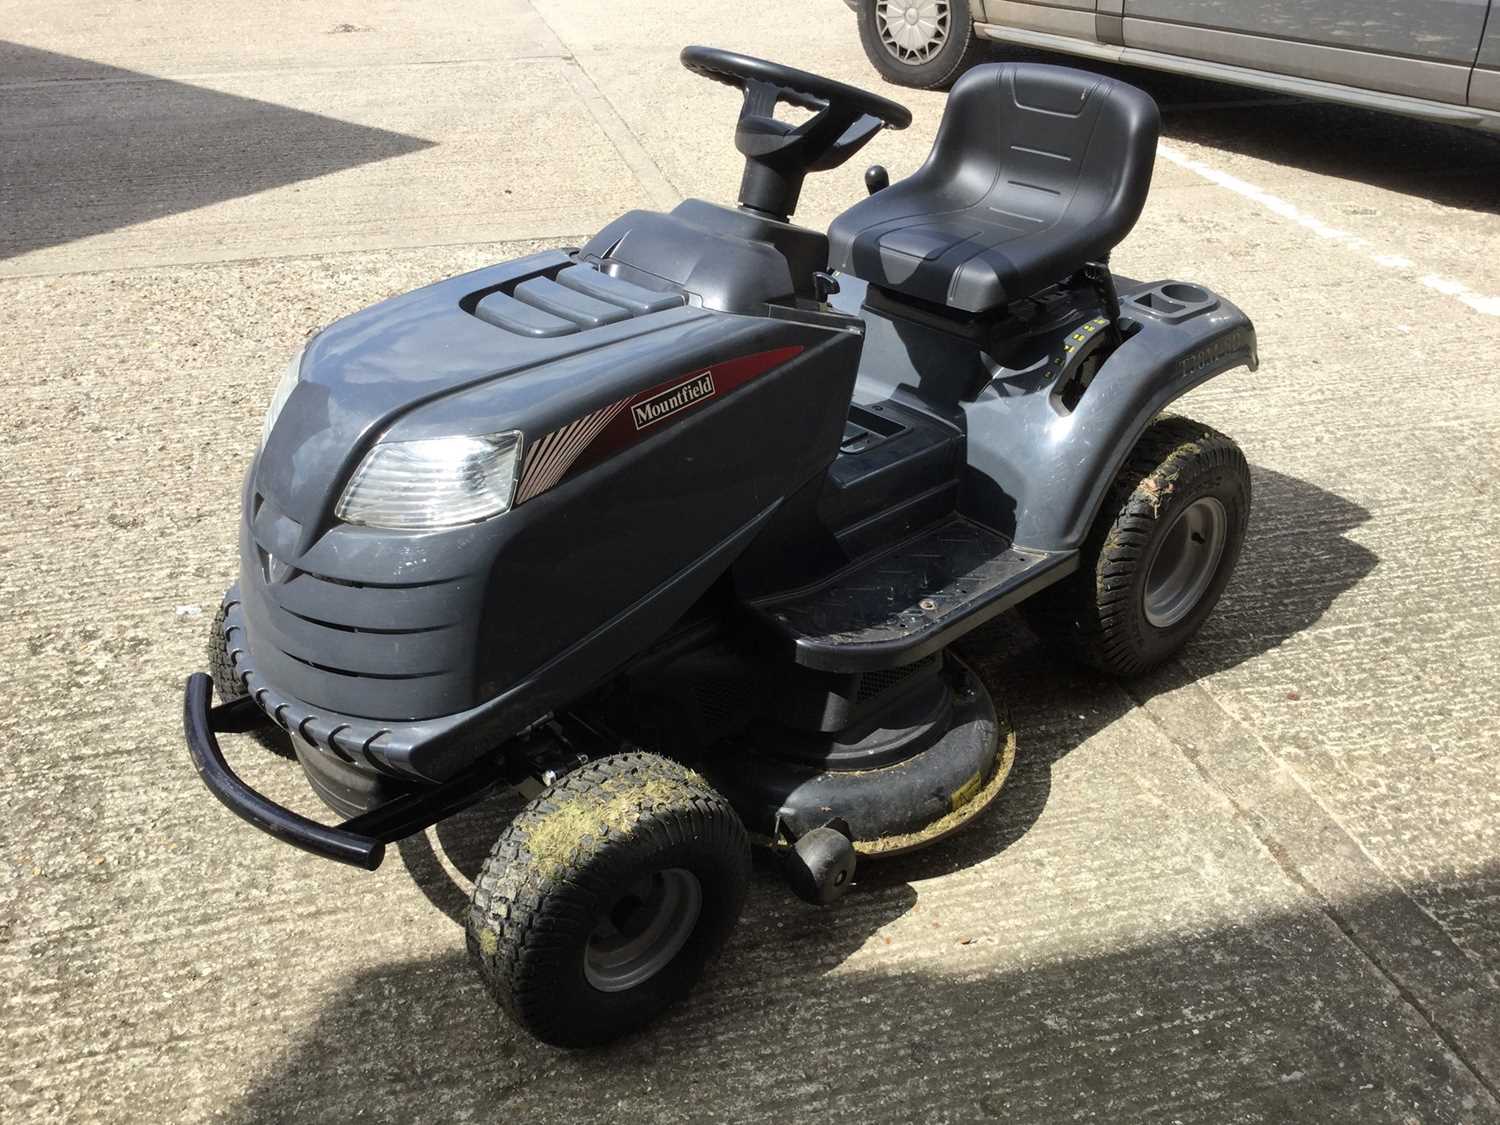 Lot 2 - Mountfield T38M- SD Petrol Ride on Lawnmower, with receipt for purchase 2nd August 2017 at a cost of £1,458